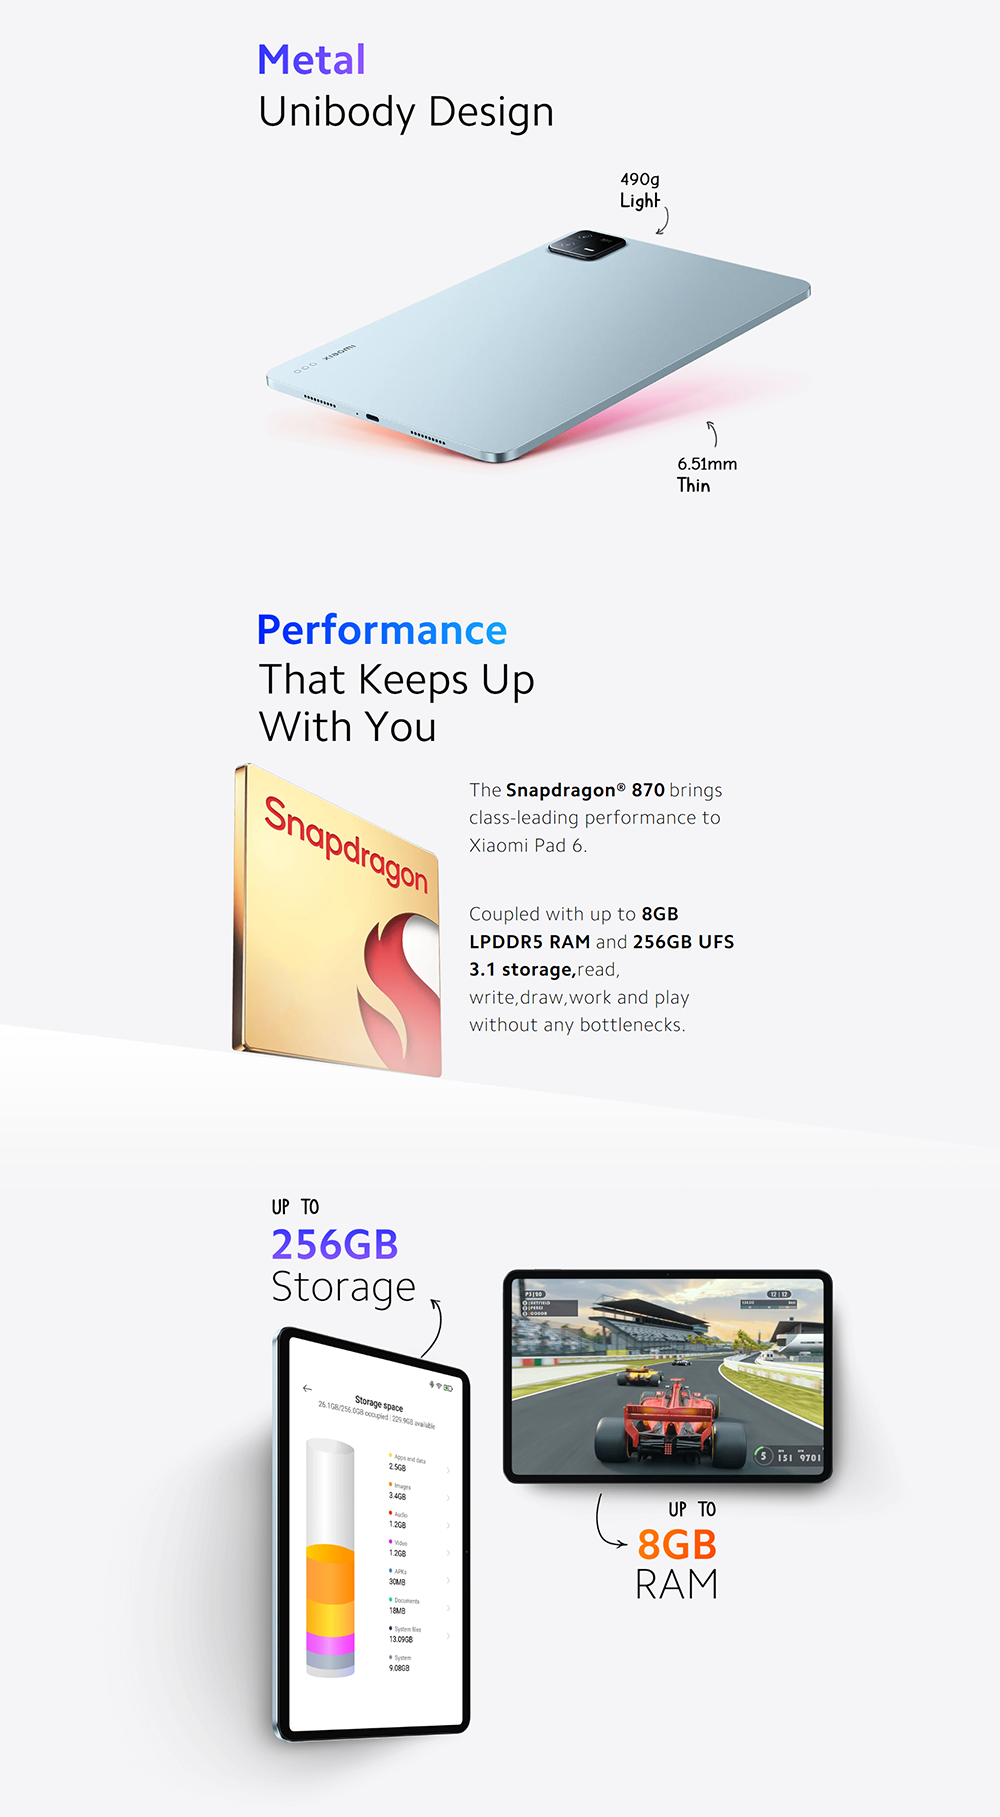 Xiaomi Pad 6 Snapdragon 870 Processor 8GB +256GB 13mp Camera Android Tablet  PC Upgradeable to Xiaomi HyperOS